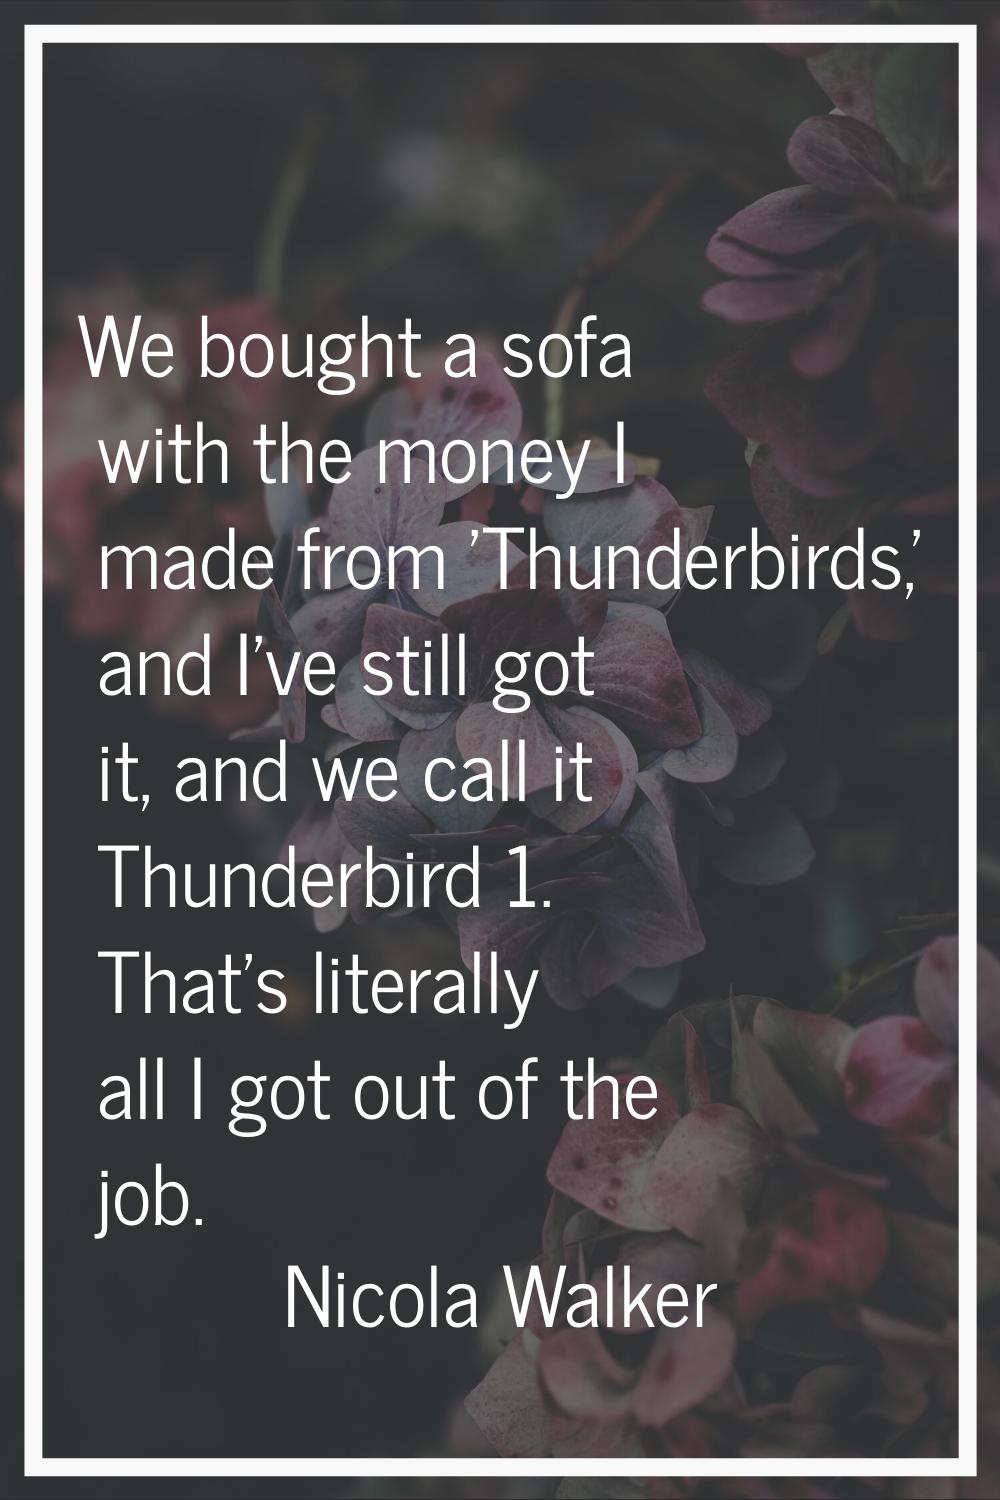 We bought a sofa with the money I made from 'Thunderbirds,' and I've still got it, and we call it T